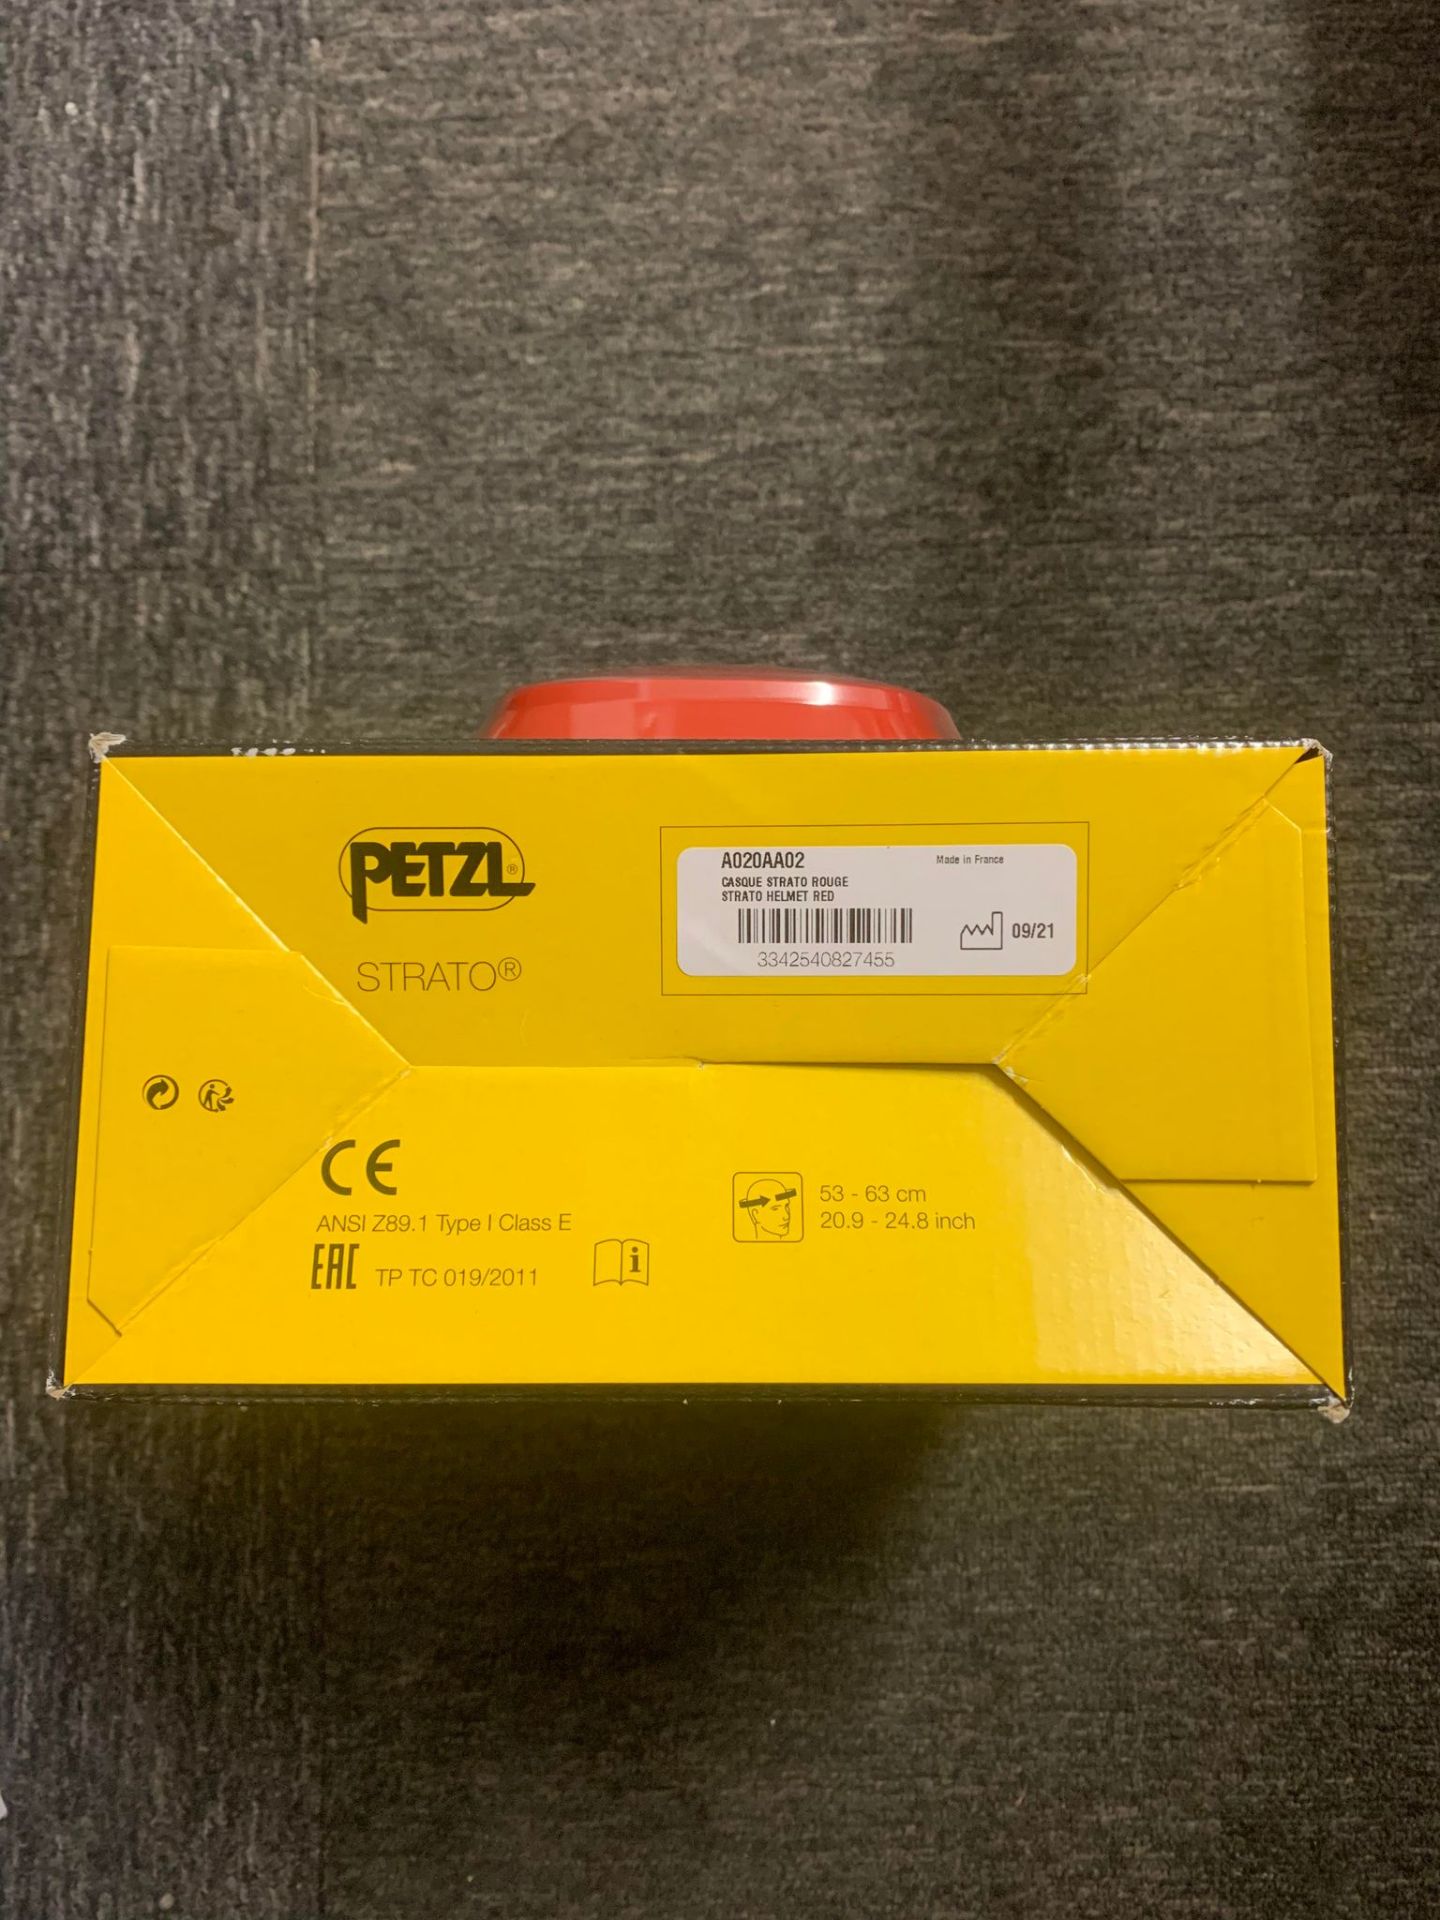 TRADE LOT OF 20 UNITS OF PETZL STRATO VENT RED HELMET CLIMBING SAFETY HAT RRP £1600